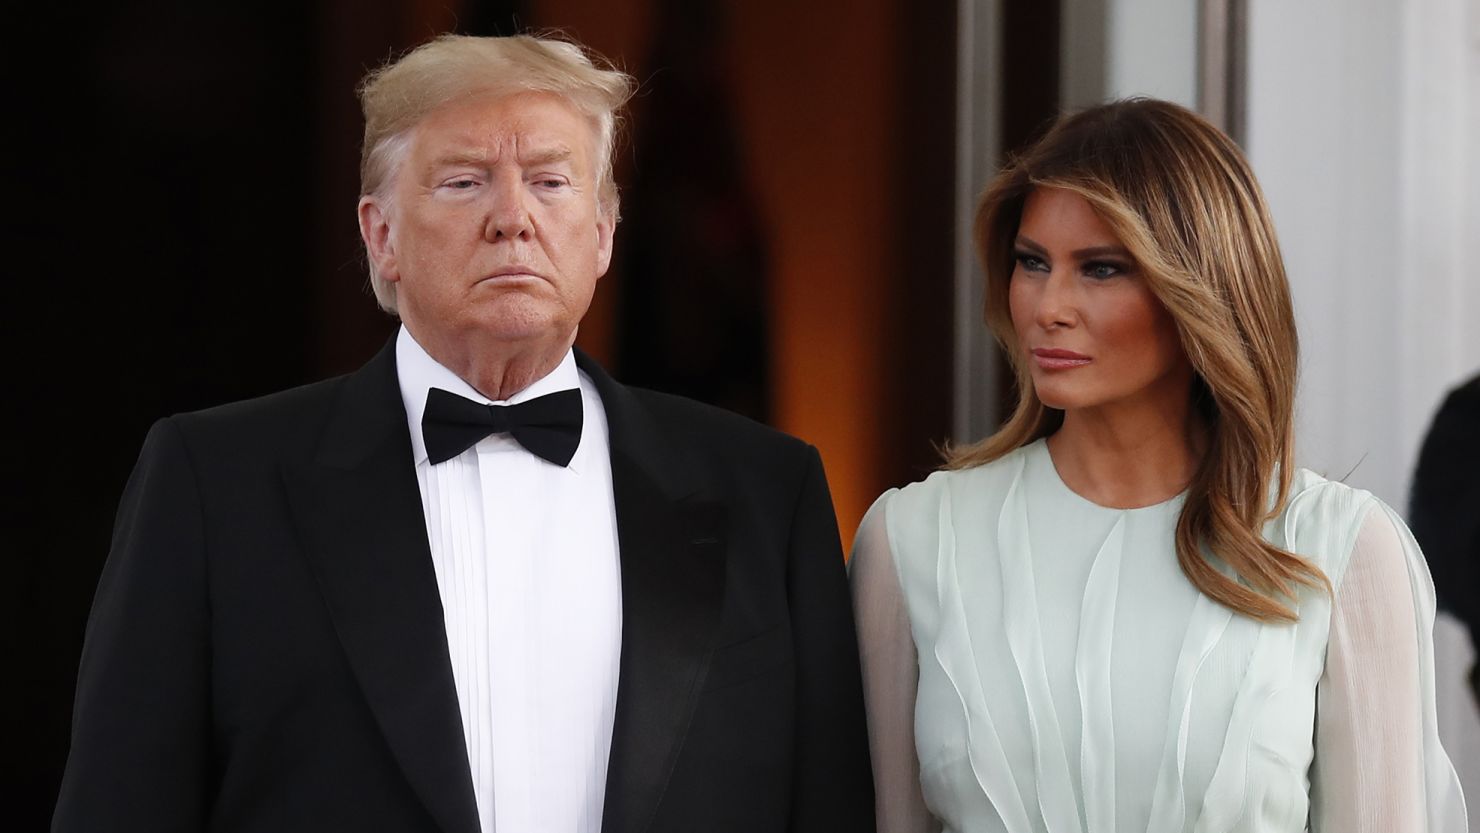 President Donald Trump and first lady Melania Trump wait to welcome Australian Prime Minister Scott Morrison and his wife, Jennifer Morrison, as they arrive for a state dinner at the White House, Friday, Sept. 20, 2019, in Washington.